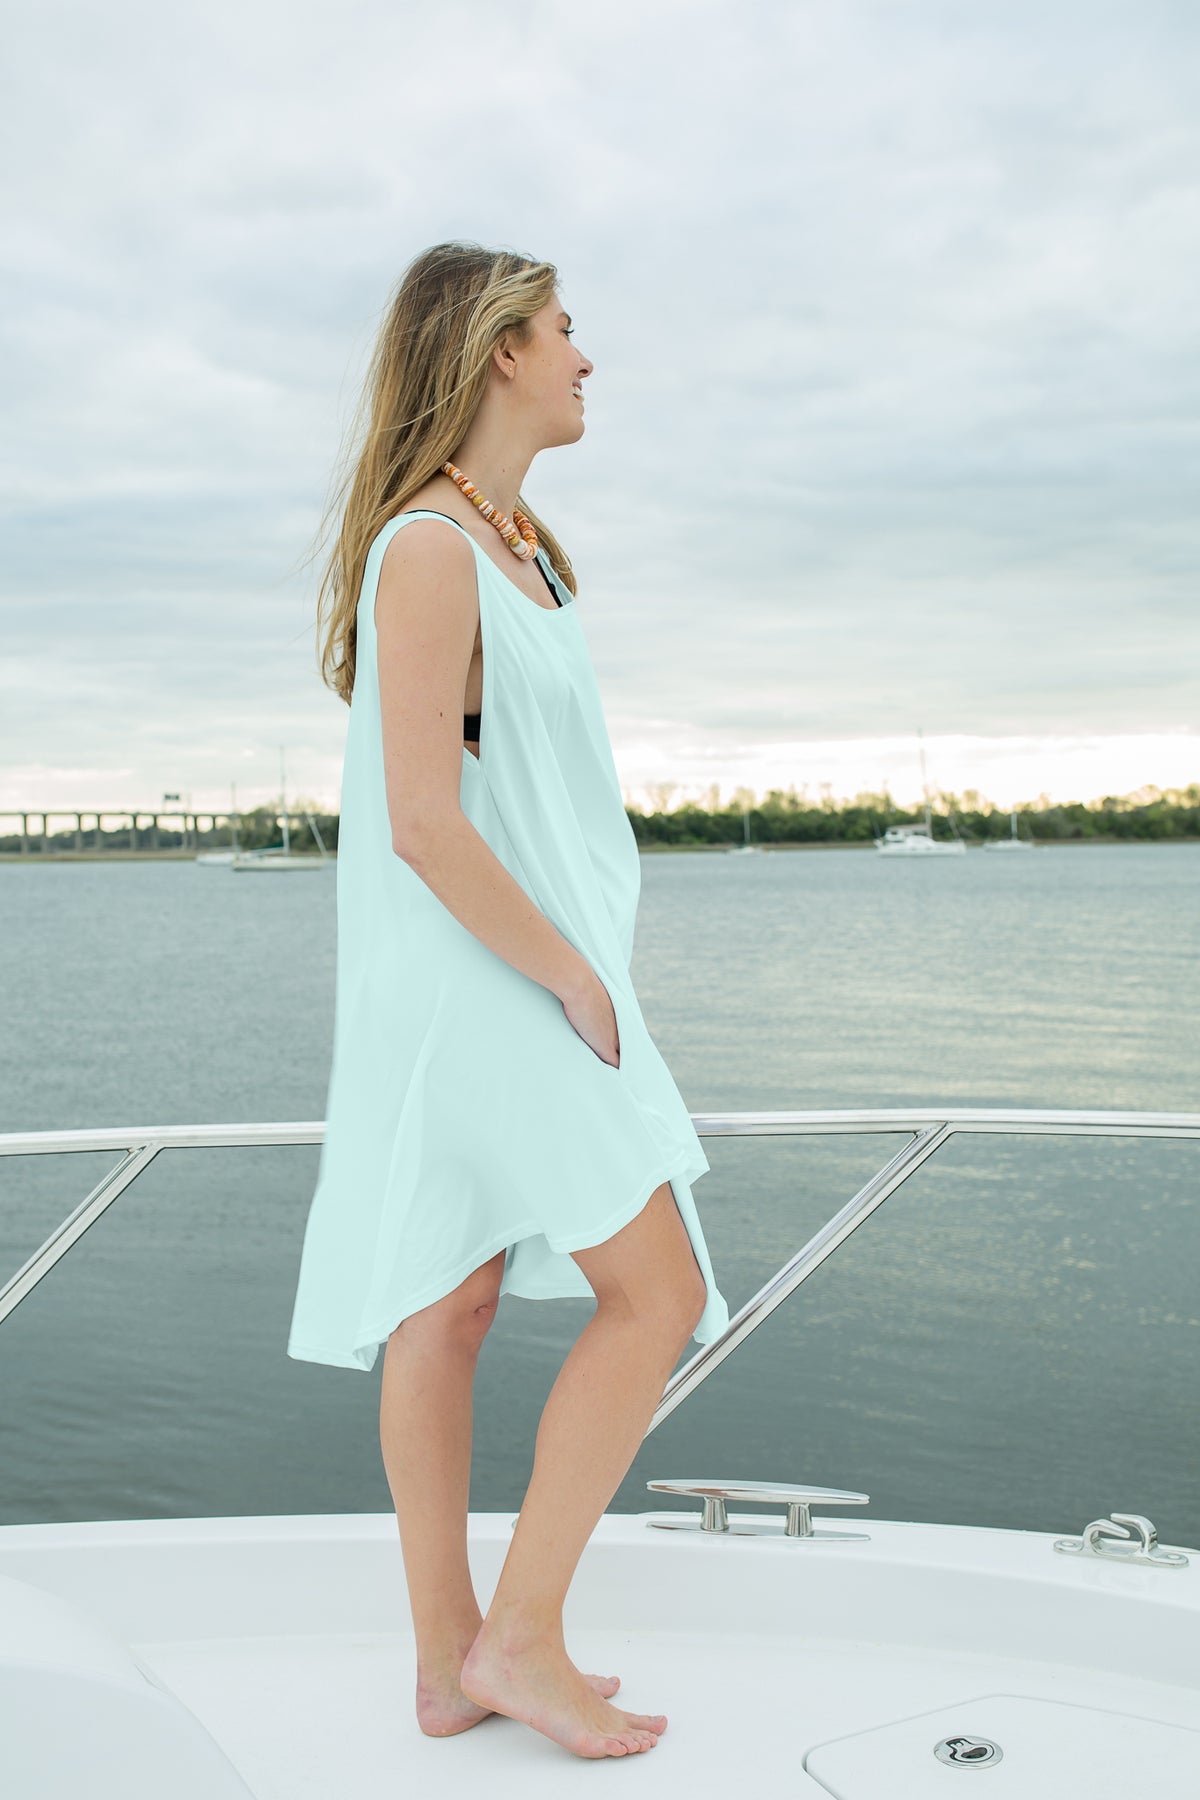 Sea Glass Green - Decked Out Dress